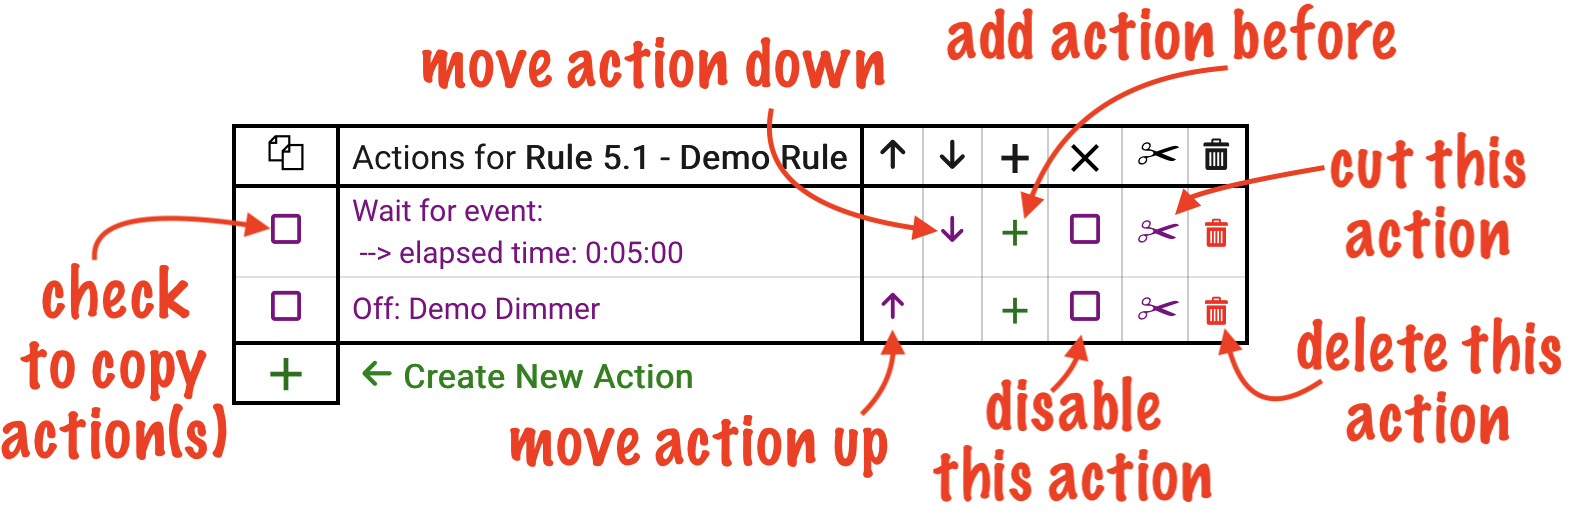 Screenshot of action editing icons described above